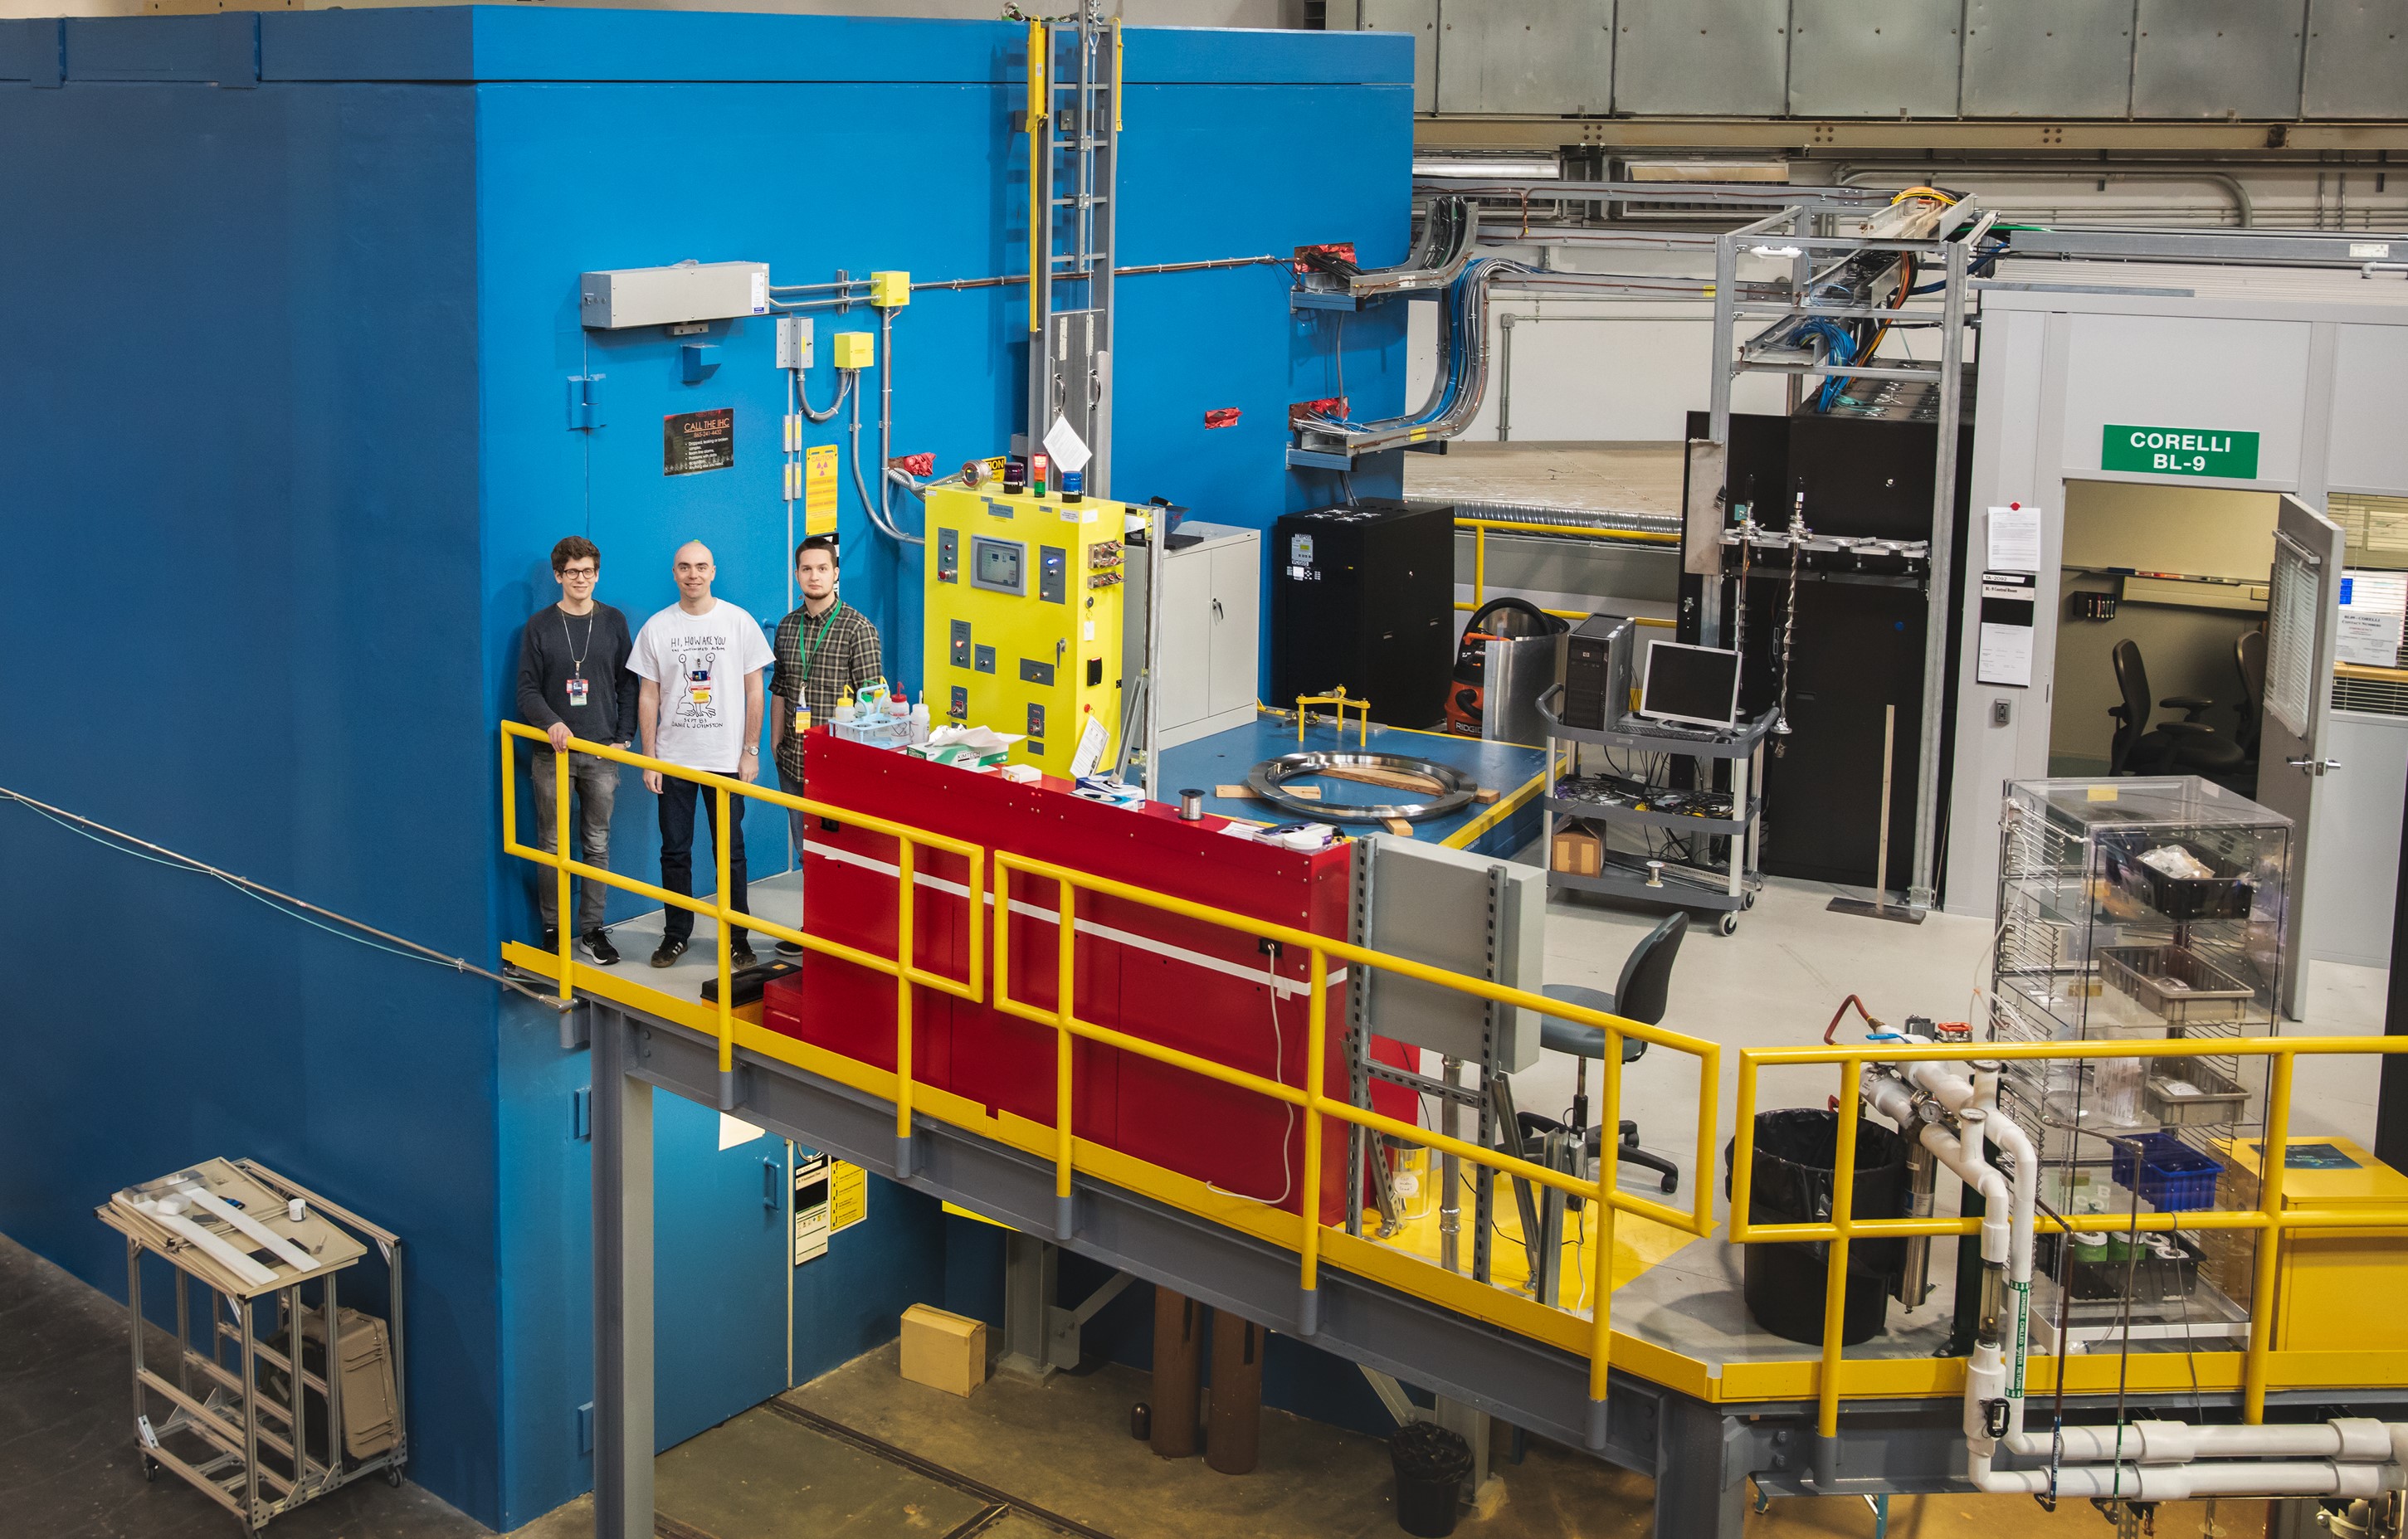 The research team, (left) Kristoffer Holm, Nikolaj Roth, and Emil Klahn, stands next to the CORELLI neutron scattering instrument at ORNL's Spallation Neutron Source. (Credit: ORNL/Genevieve Martin) 